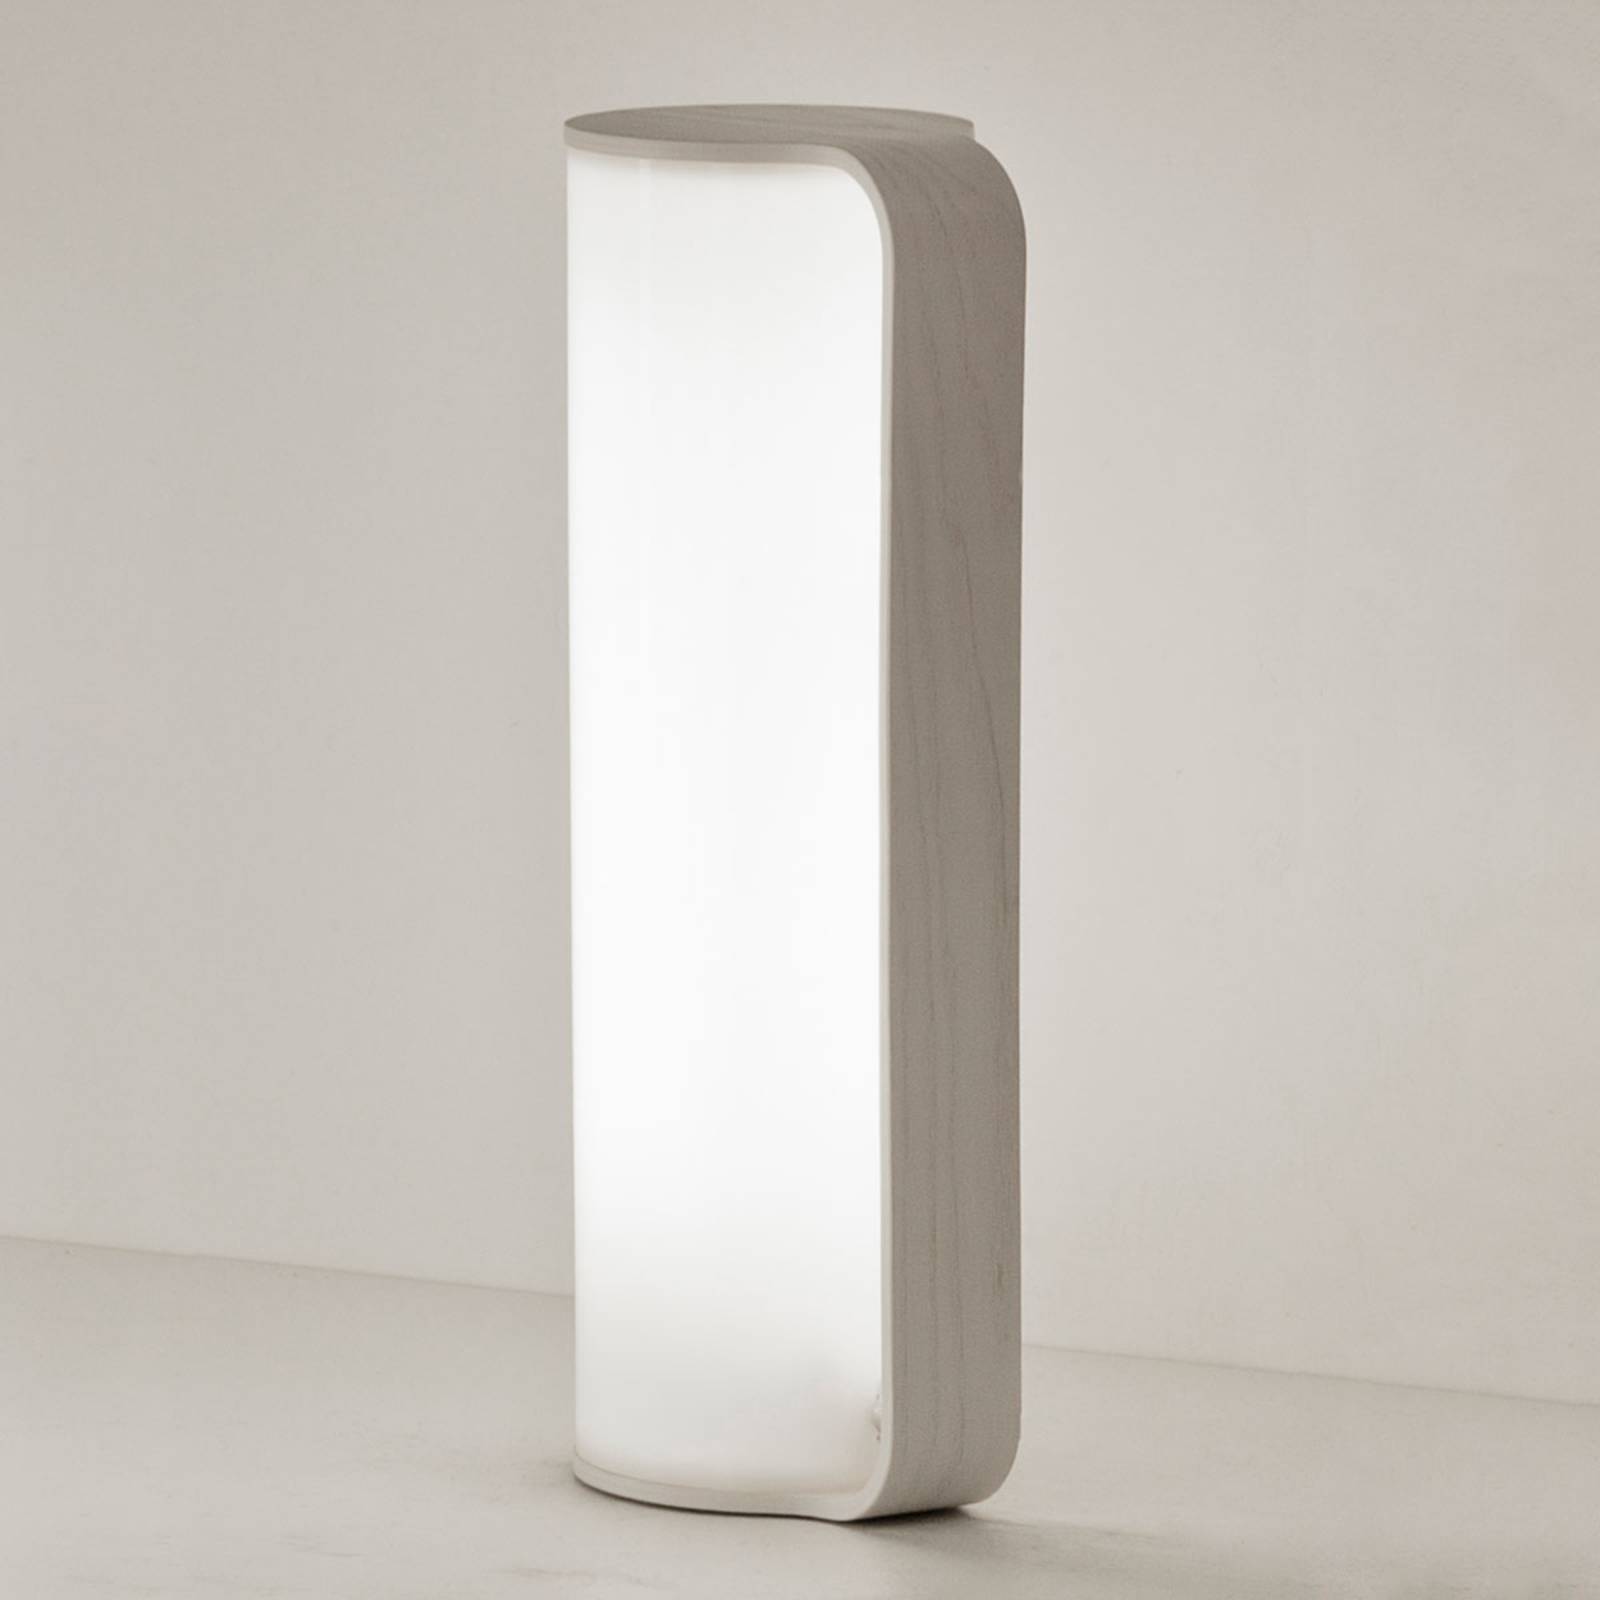 Image of Innolux Tubo lampe thérapie LED dimmable blanche 6420611984829